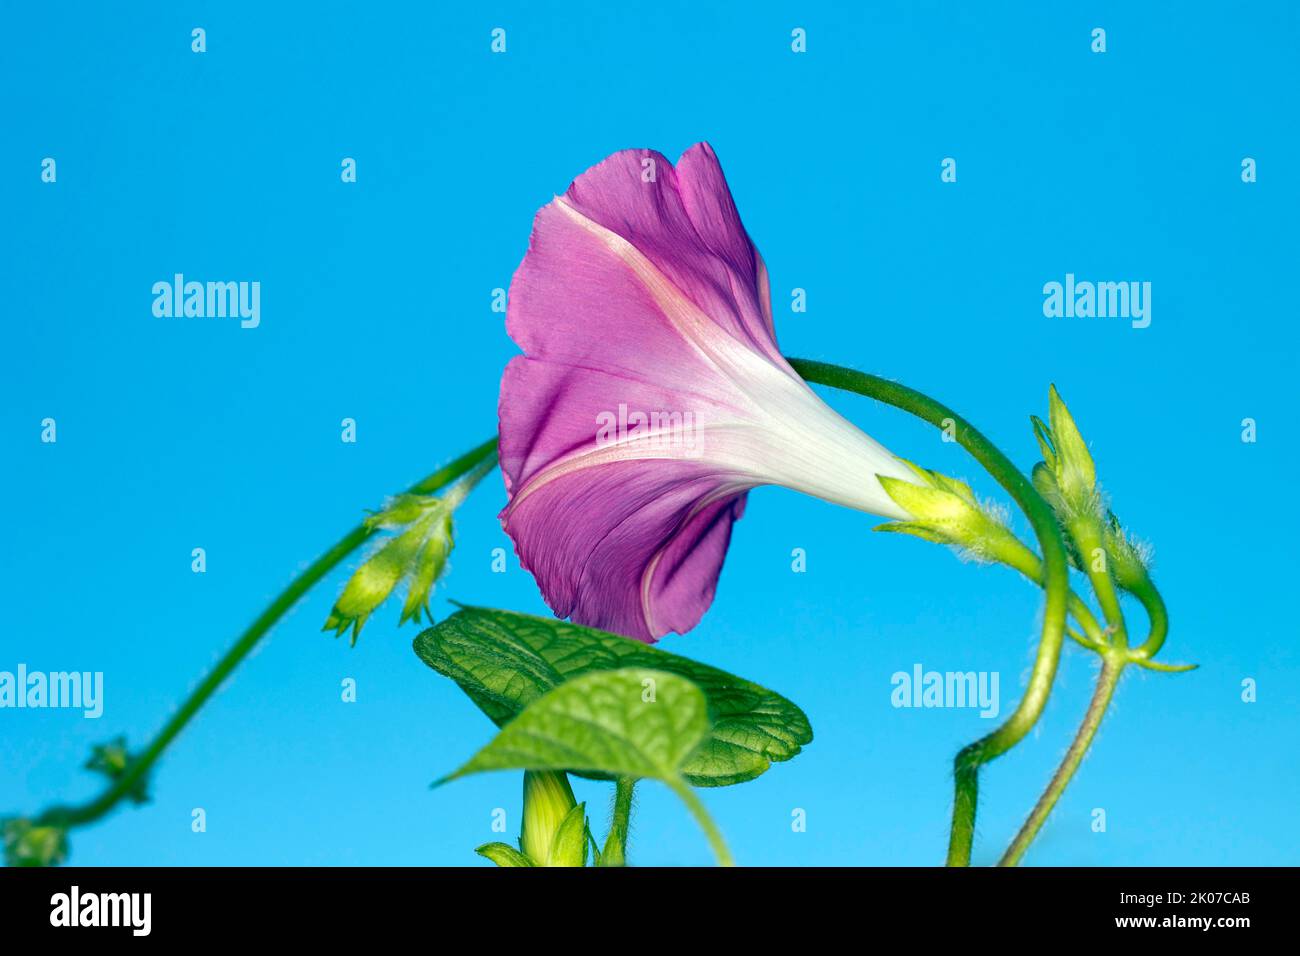 A flower of the showy bindweed (Ipomoea tricolor), Berlin, Germany Stock Photo